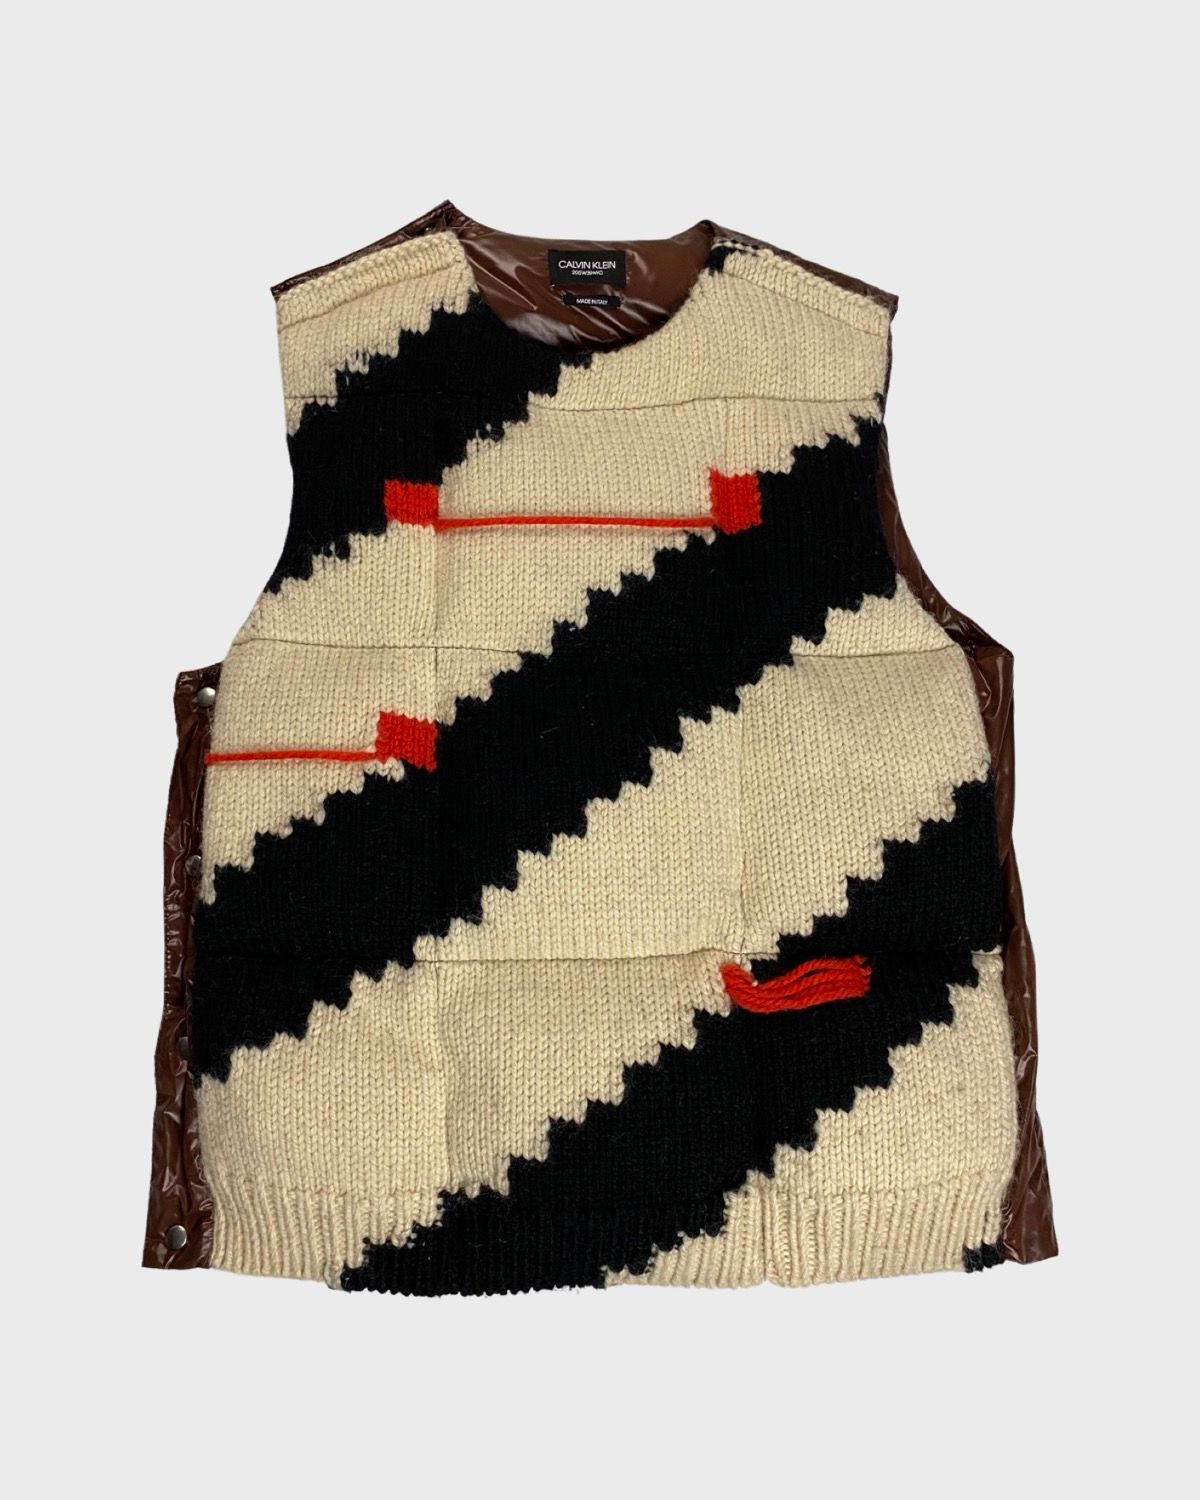 Raf Simons SZ L AW18 runway padded down filled knit vest in creme | Grailed